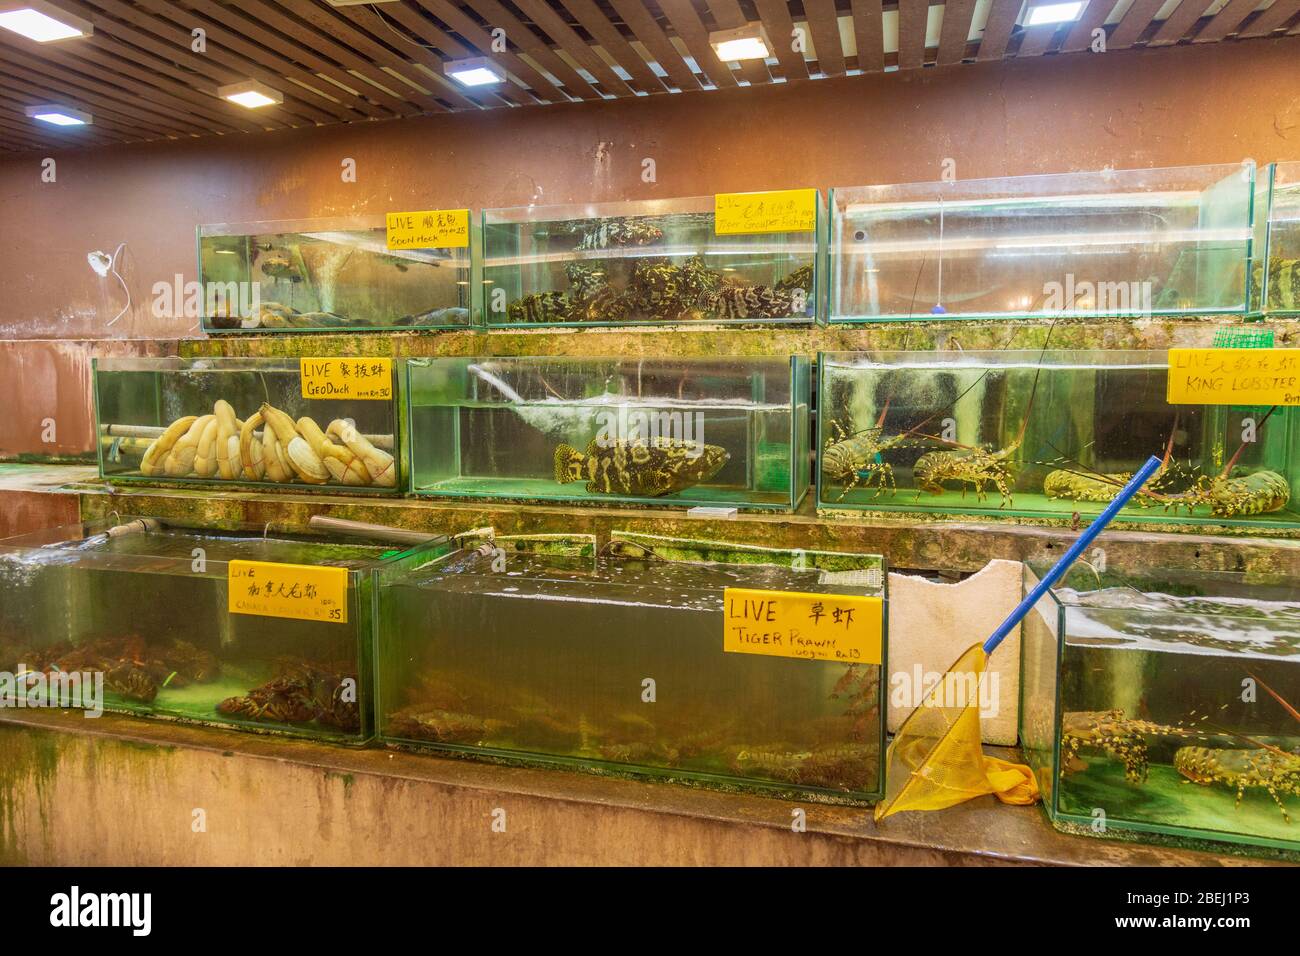 Animals caught in the ocean kept in large fish tanks for sale in Malaysia. Stock Photo